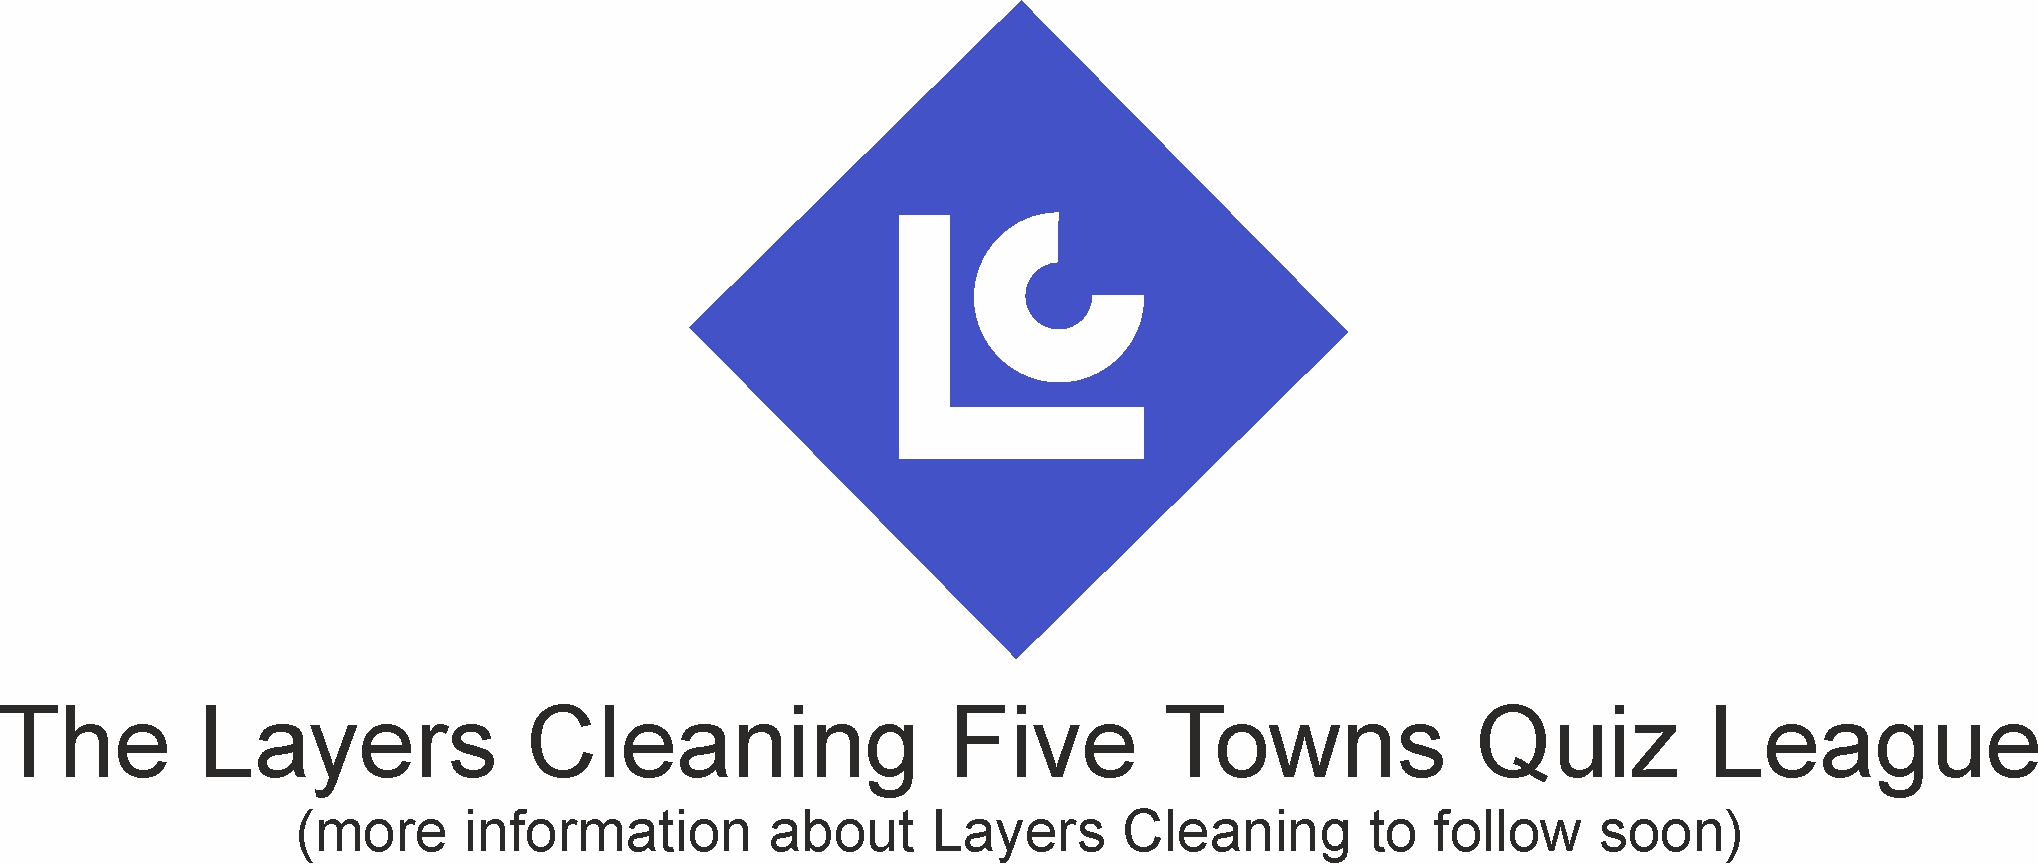 LayersCleaning.jpg